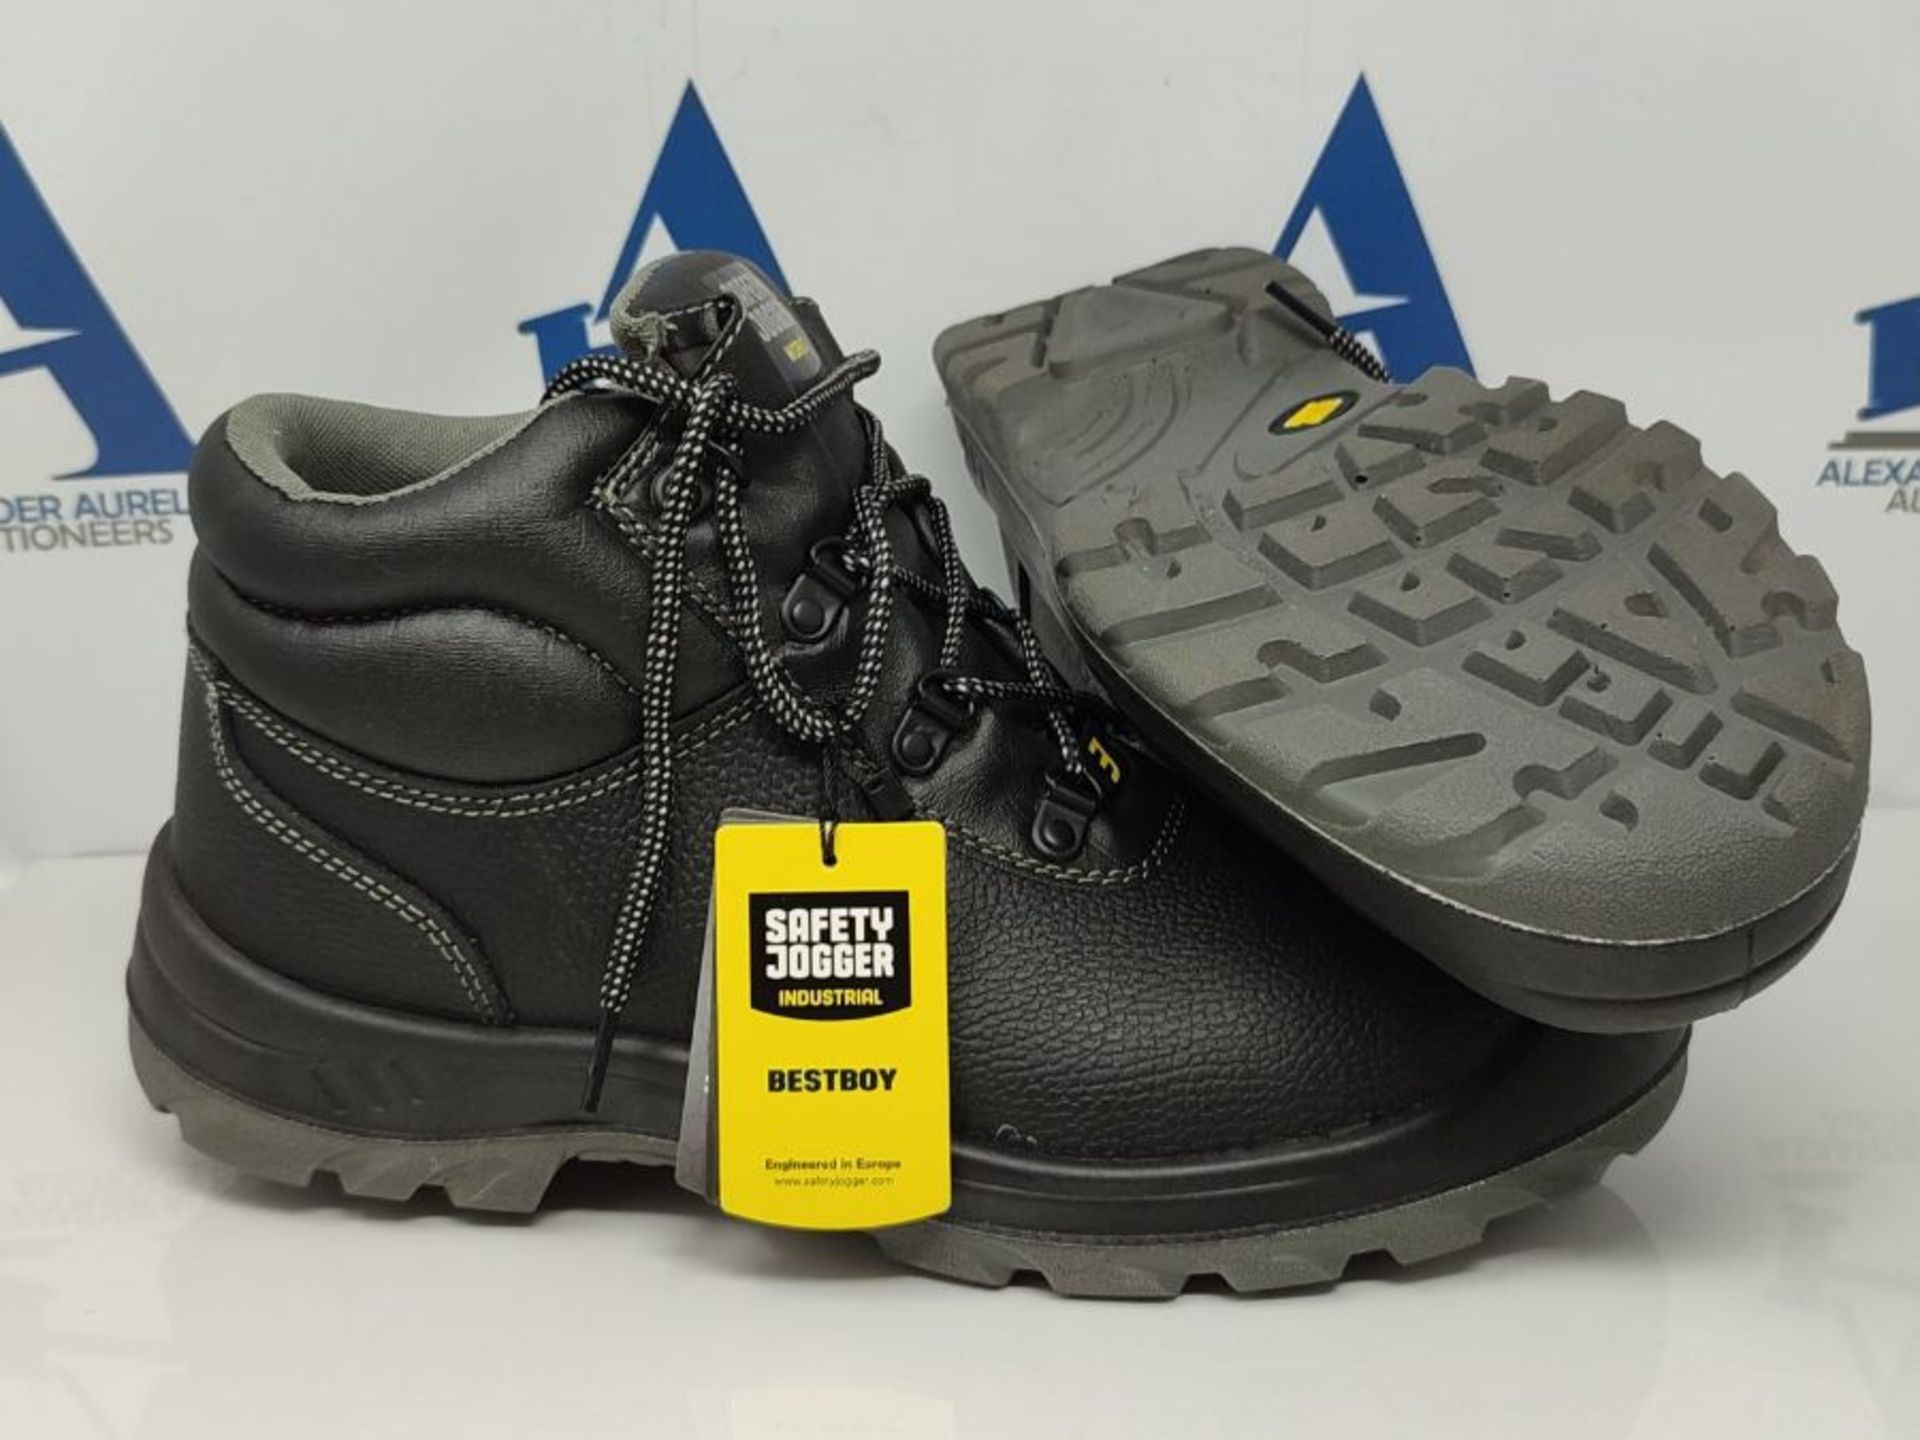 SAFETY JOGGER Safety Boot - BESTBOY - Steel Toe Cap S3/S1P Work Shoe for Men or Women, - Image 3 of 6